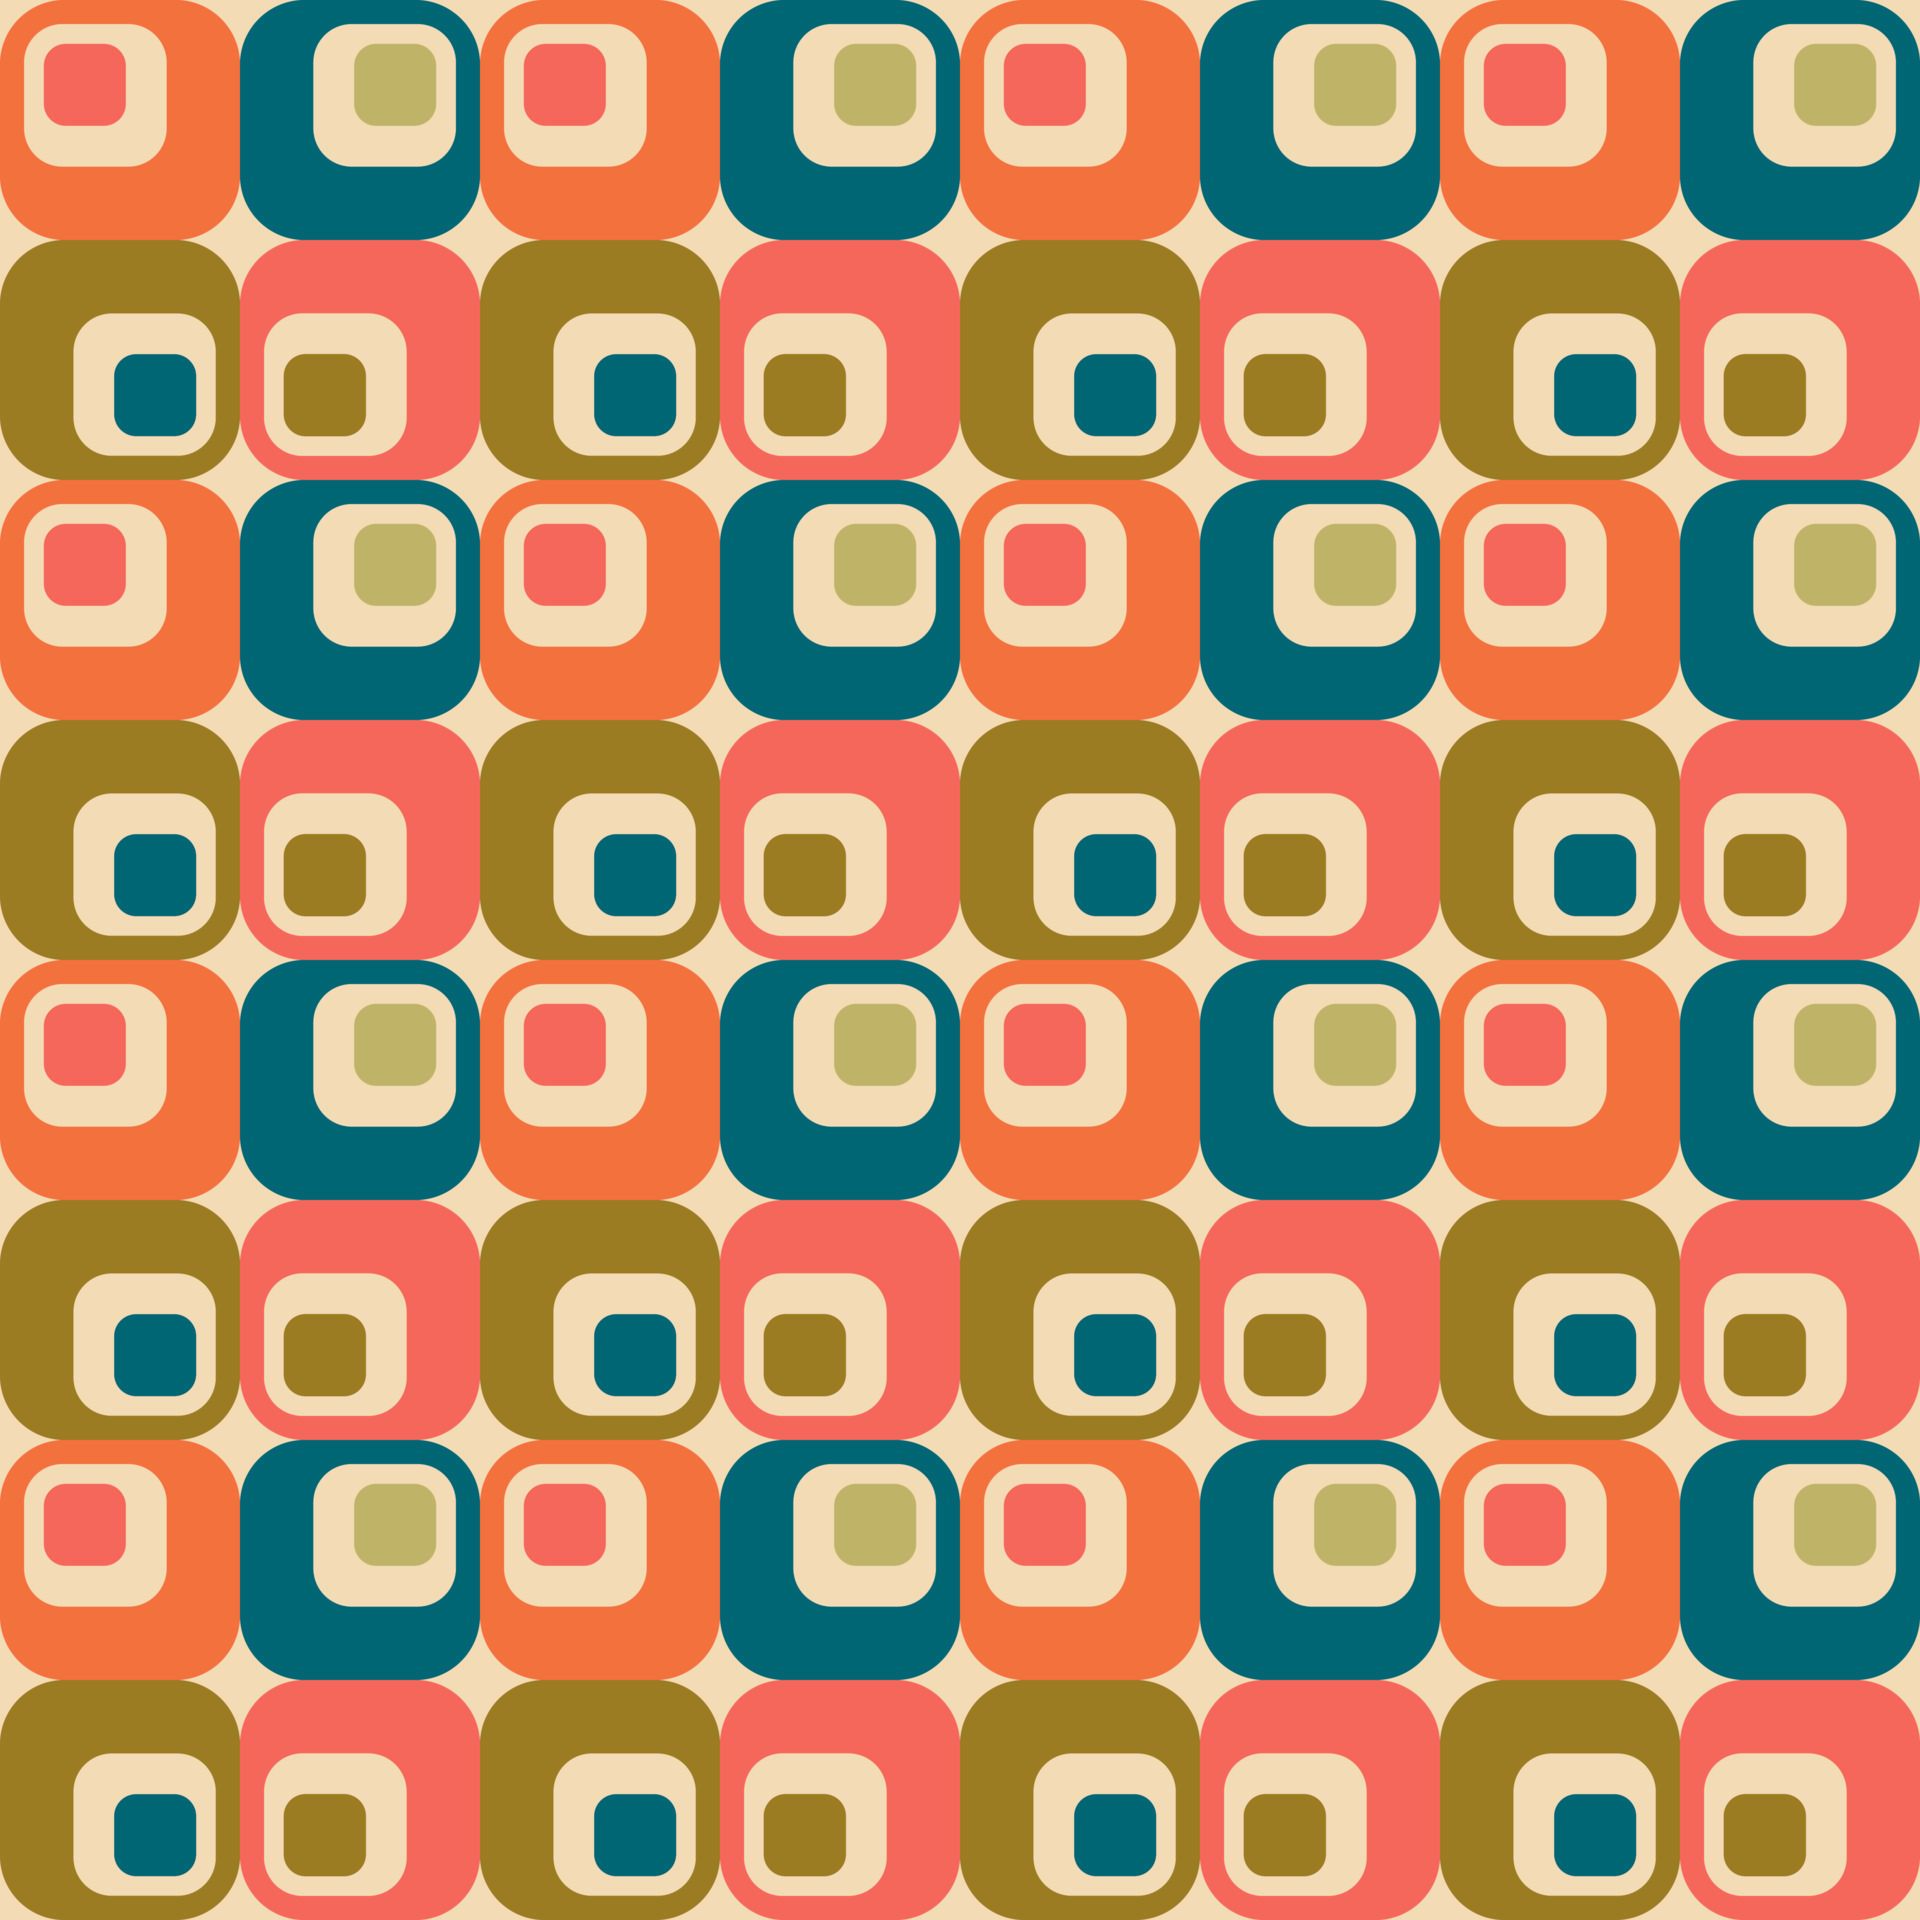 A colorful pattern of squares and rectangles in shades of blue, orange, green, and brown. - 60s, 50s, modern